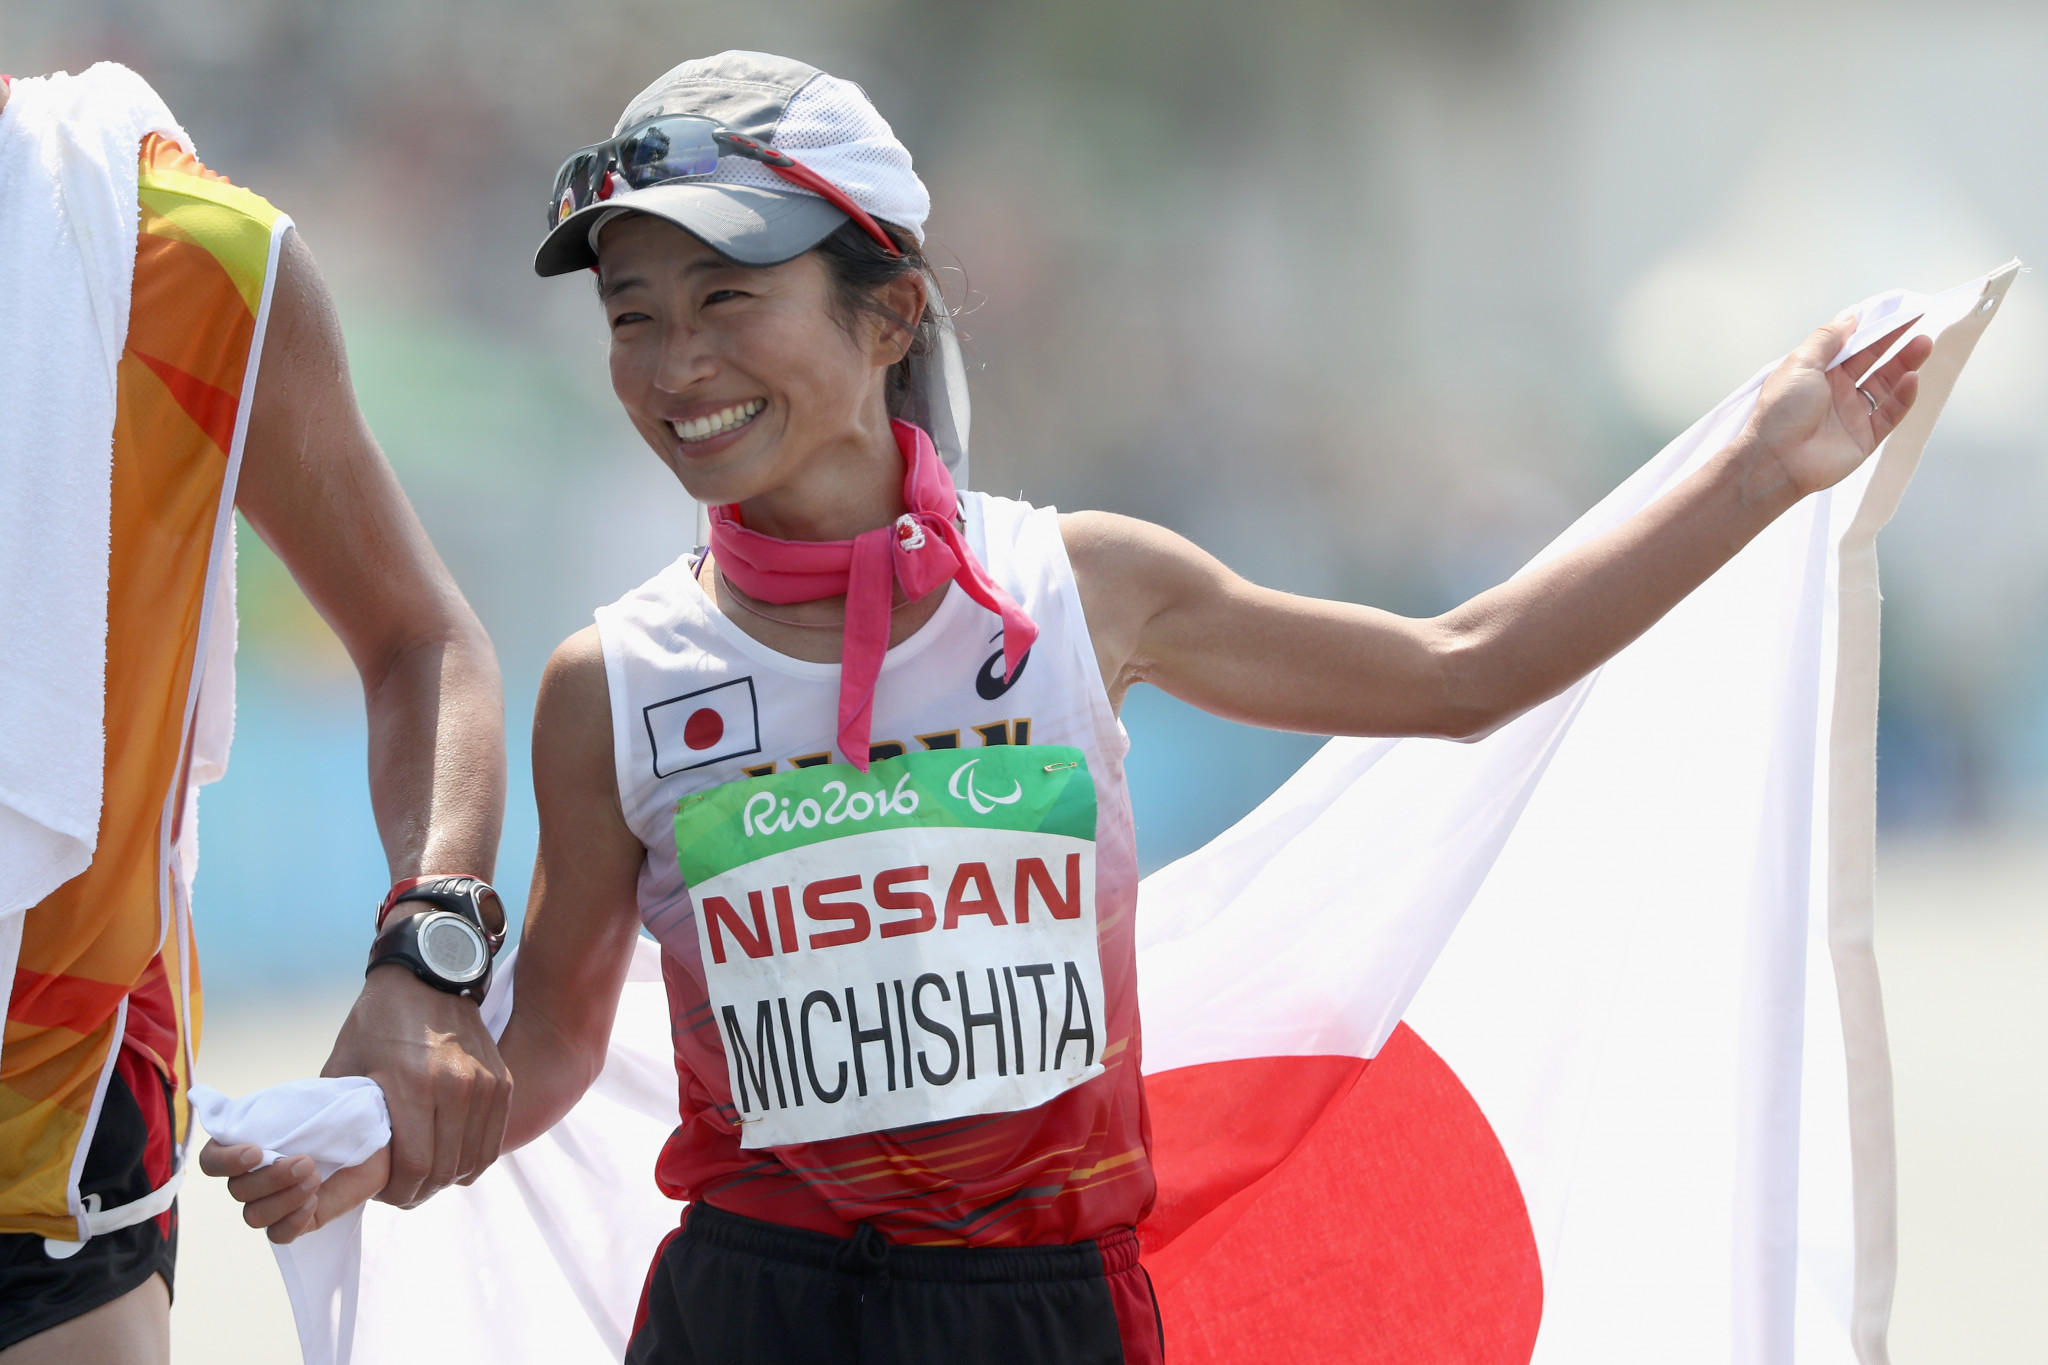 Misato Michishita is a silver medallist from the Rio 2016 Paralympics ©Getty Images